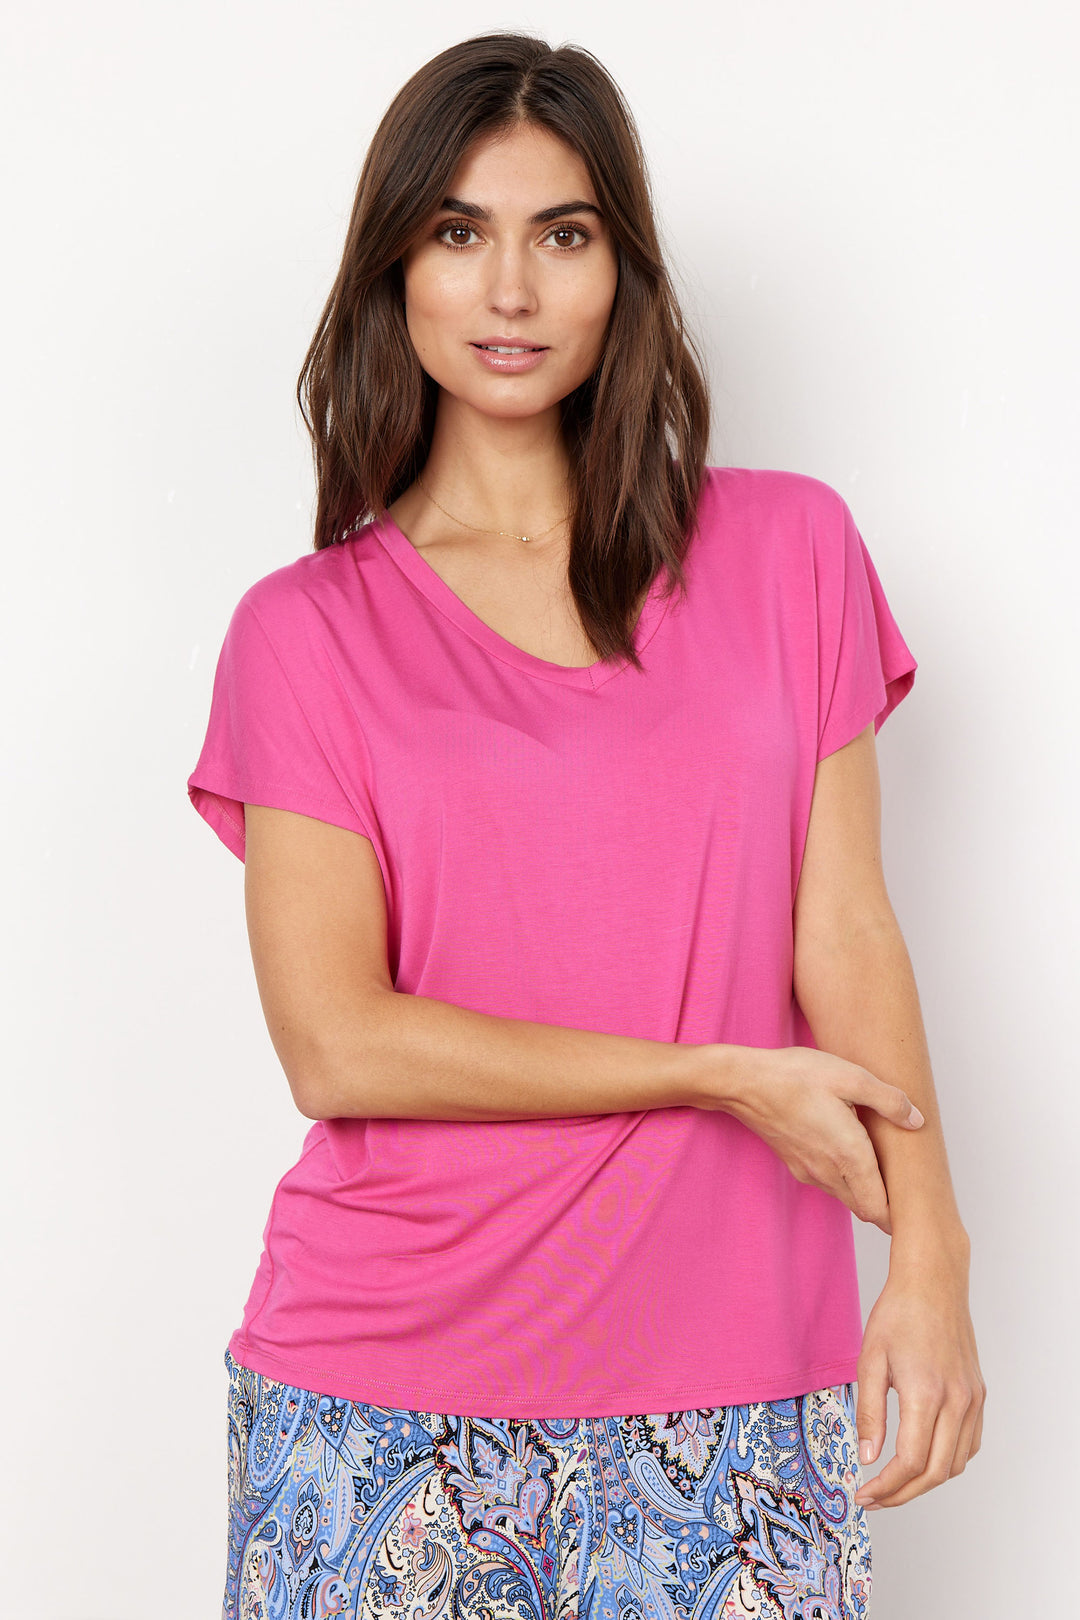 SOYA CONCEPT SPRING '23 women's casual basic loose fit V-neck t-shirt - fuchsia front